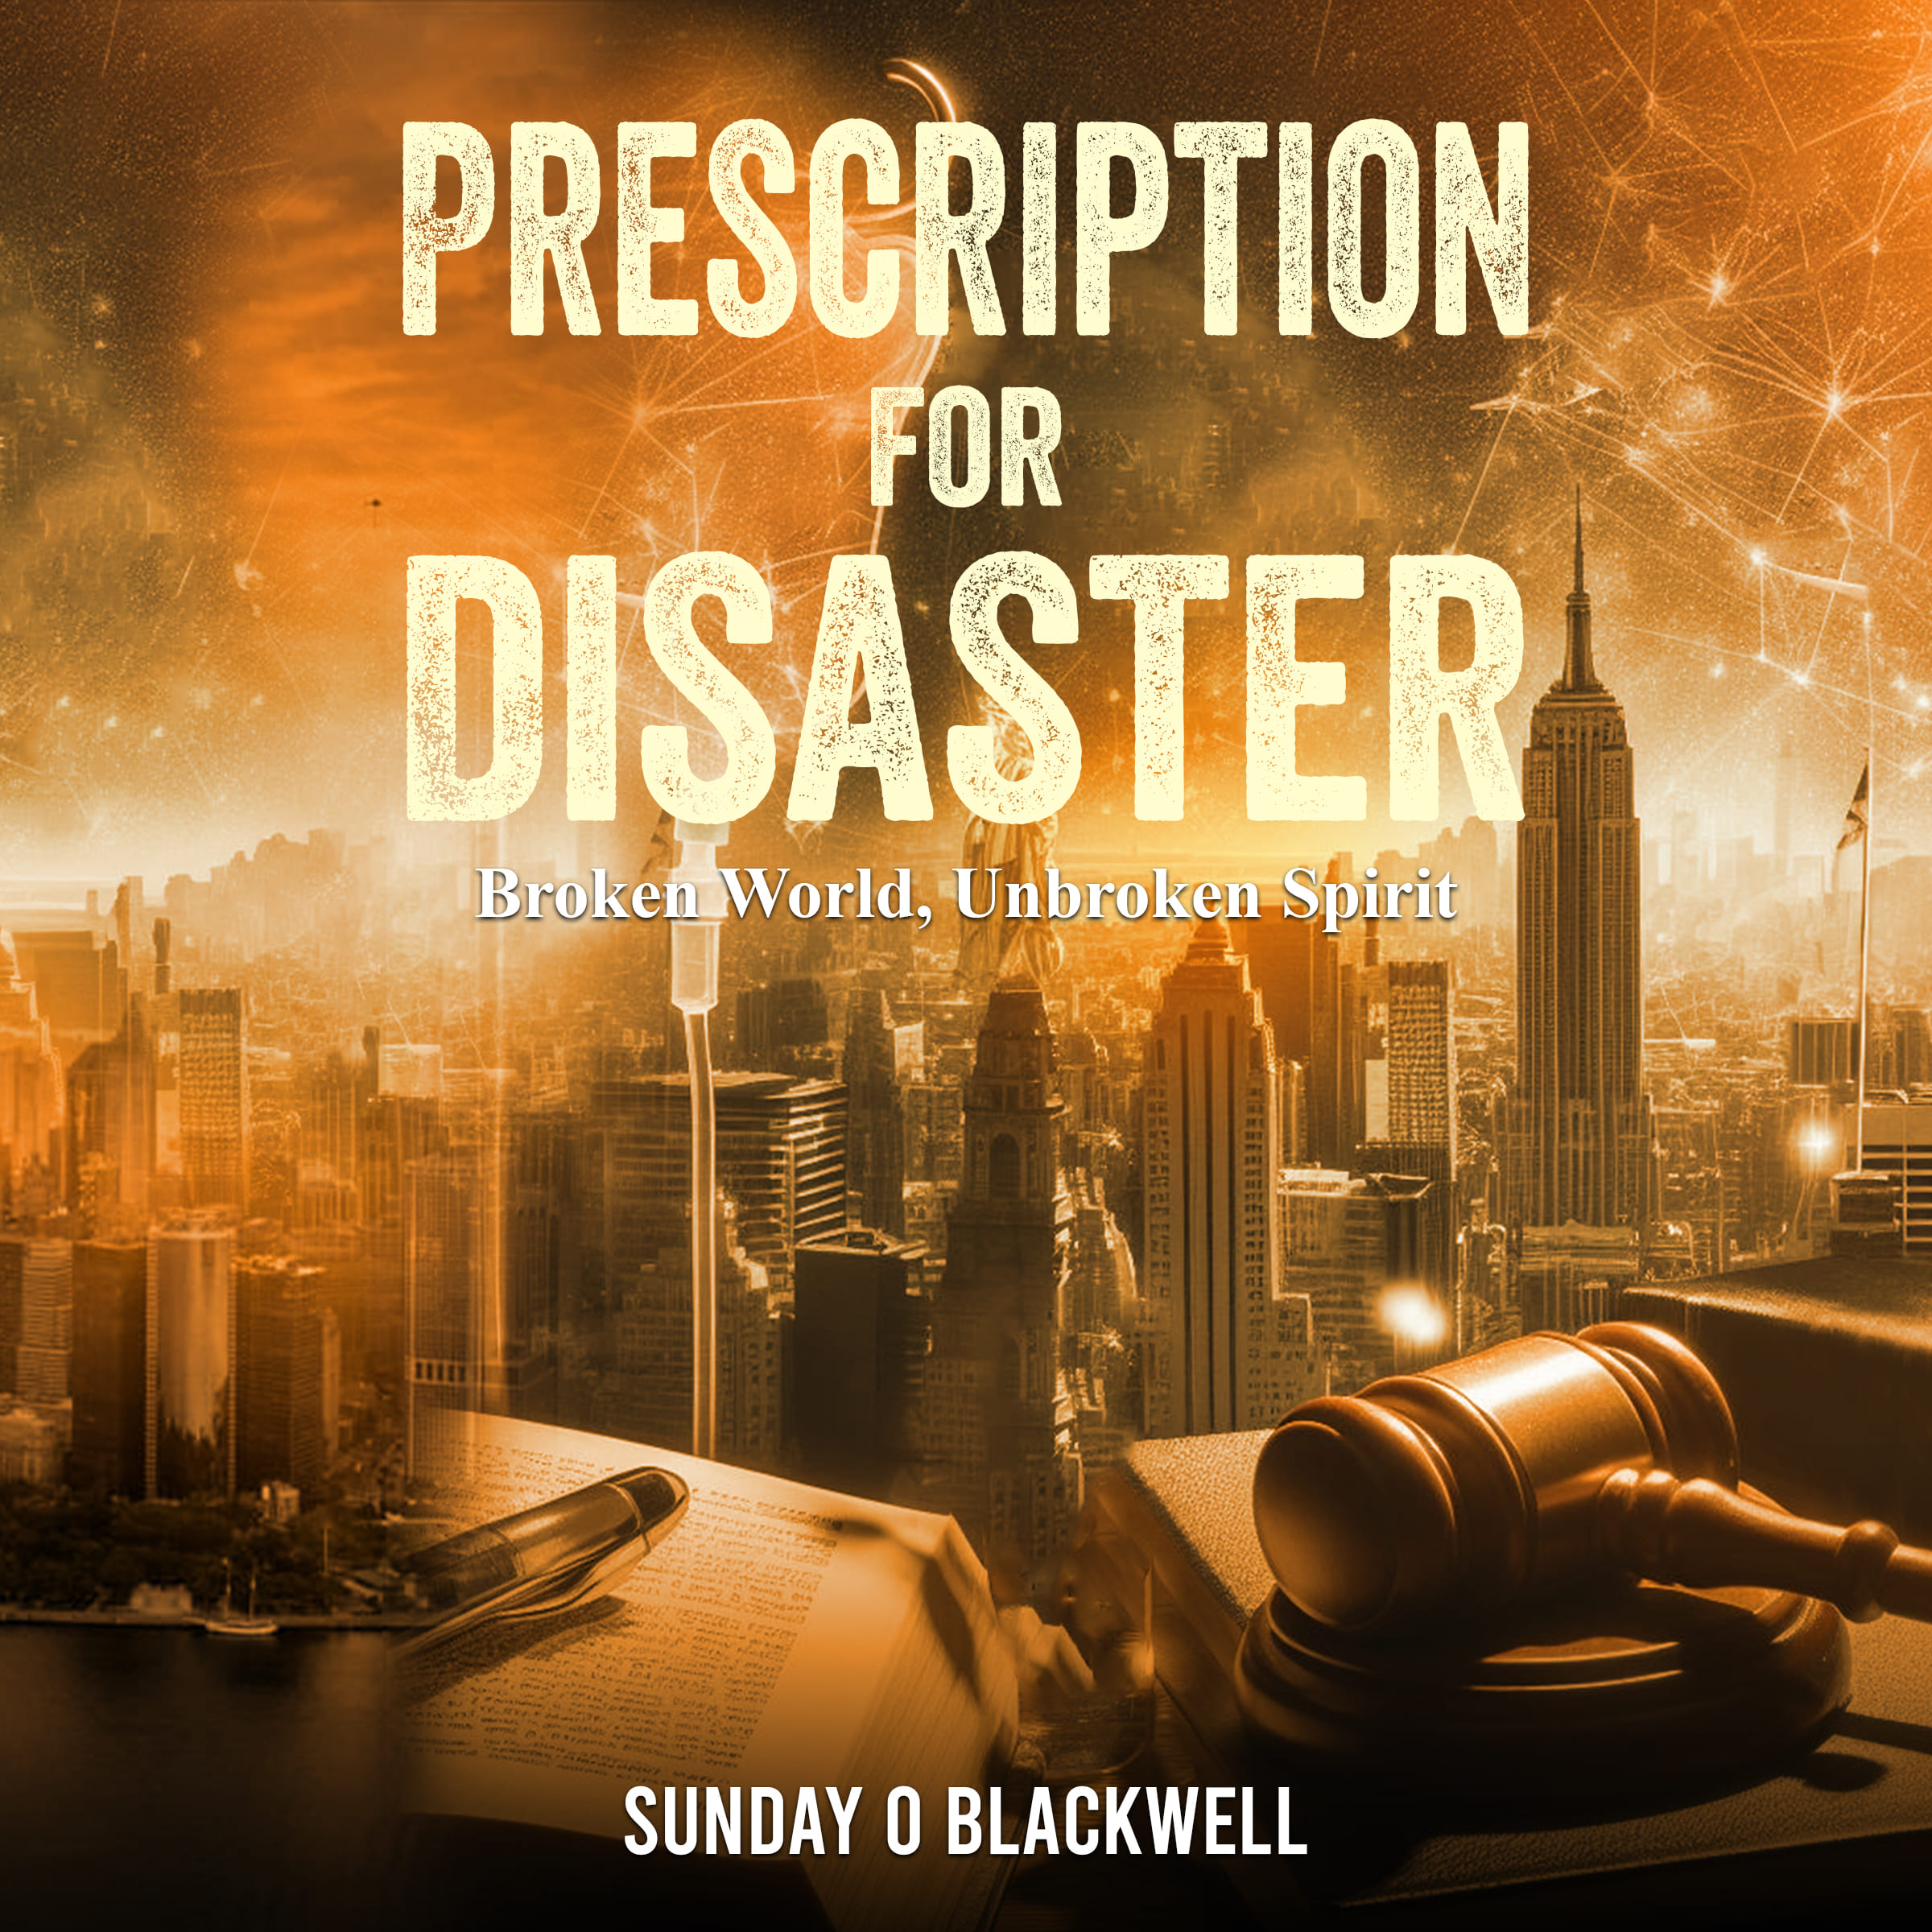 Prescription for Disaster Book by Sunday O Blackwell